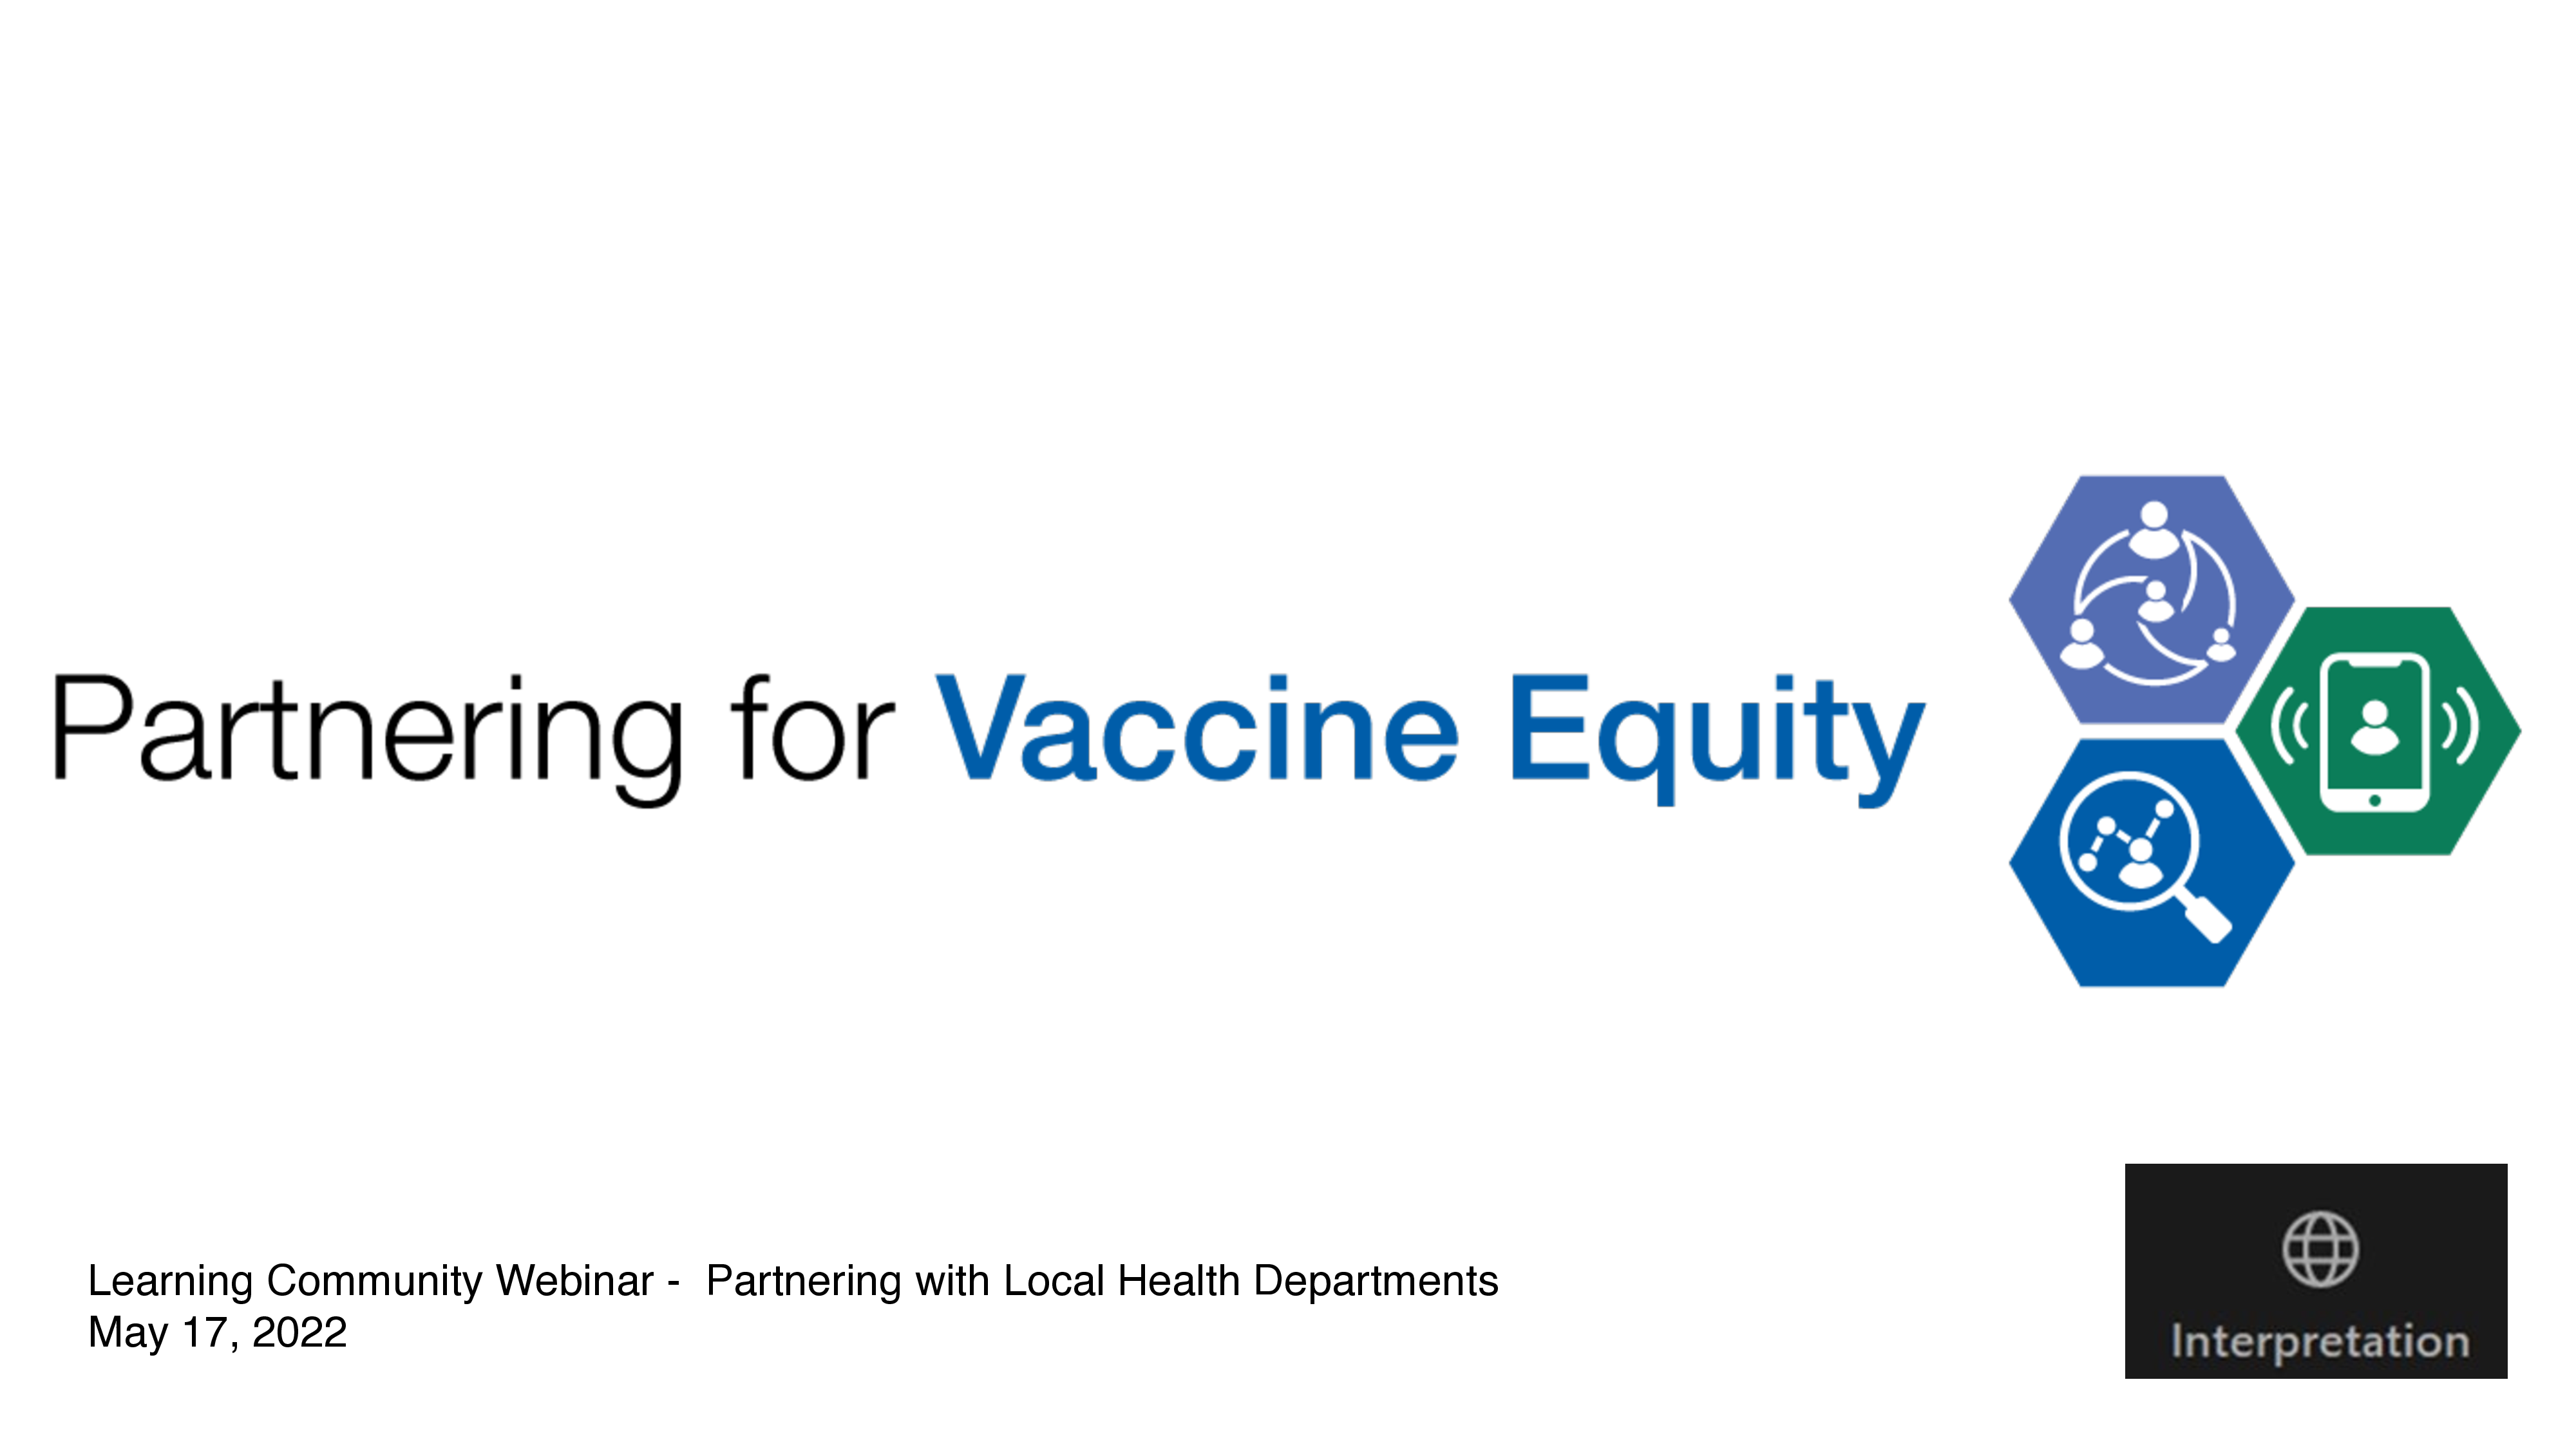 First page of a presentation features the Partnership for Vaccine Equity title and logo. 